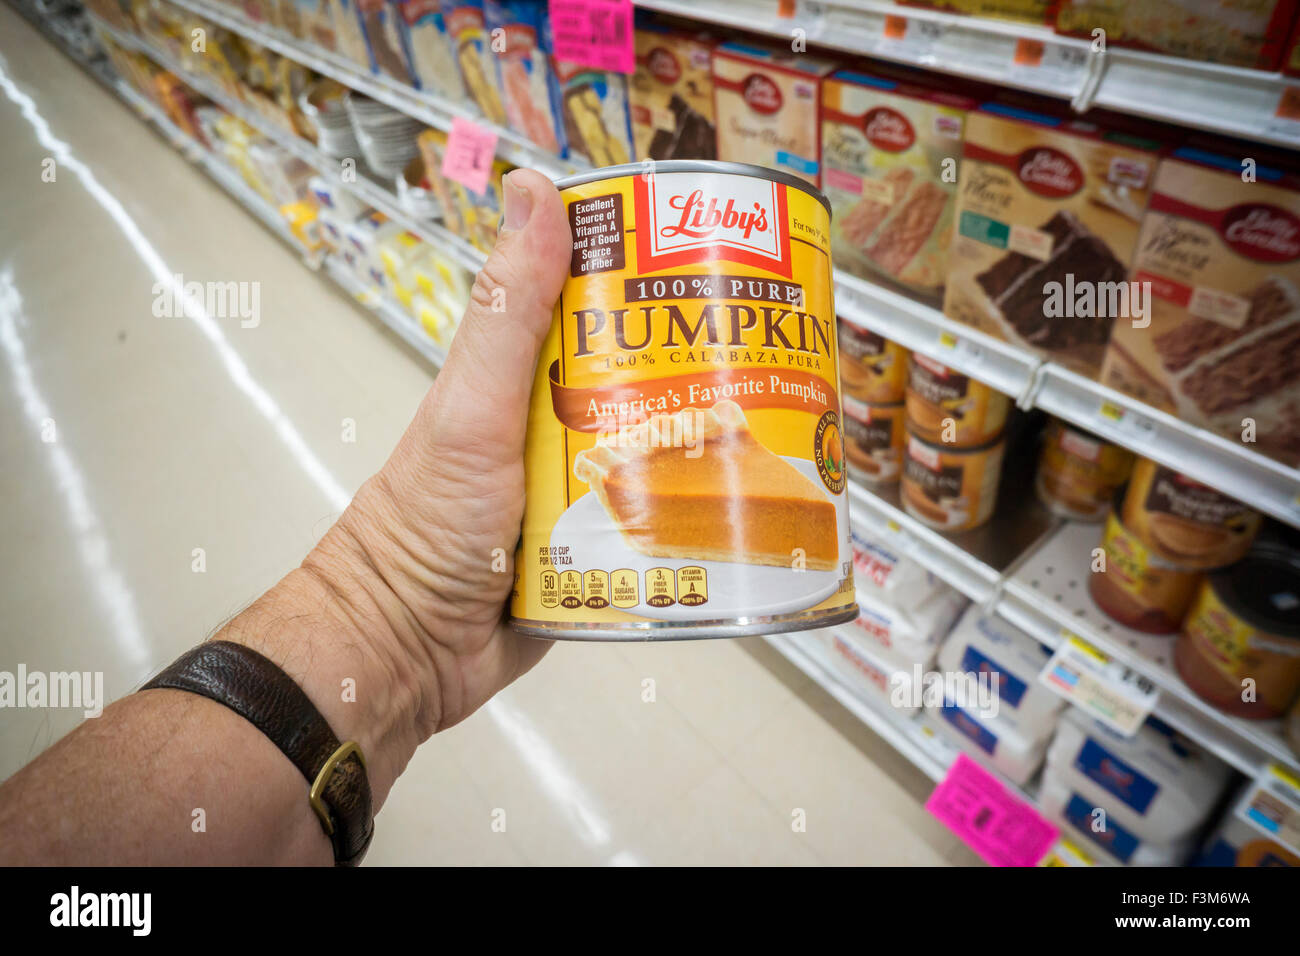 A shopper chooses a can of Libby's Pumpkin filling at a supermarket in New York on Thursday, October 8, 2015. Because of a record rainfall in Illinois the pumpkin harvest is off by about one-third. Illinois provides almost 90% of al the pumpkins canned. (© Richard B. Levine) Stock Photo